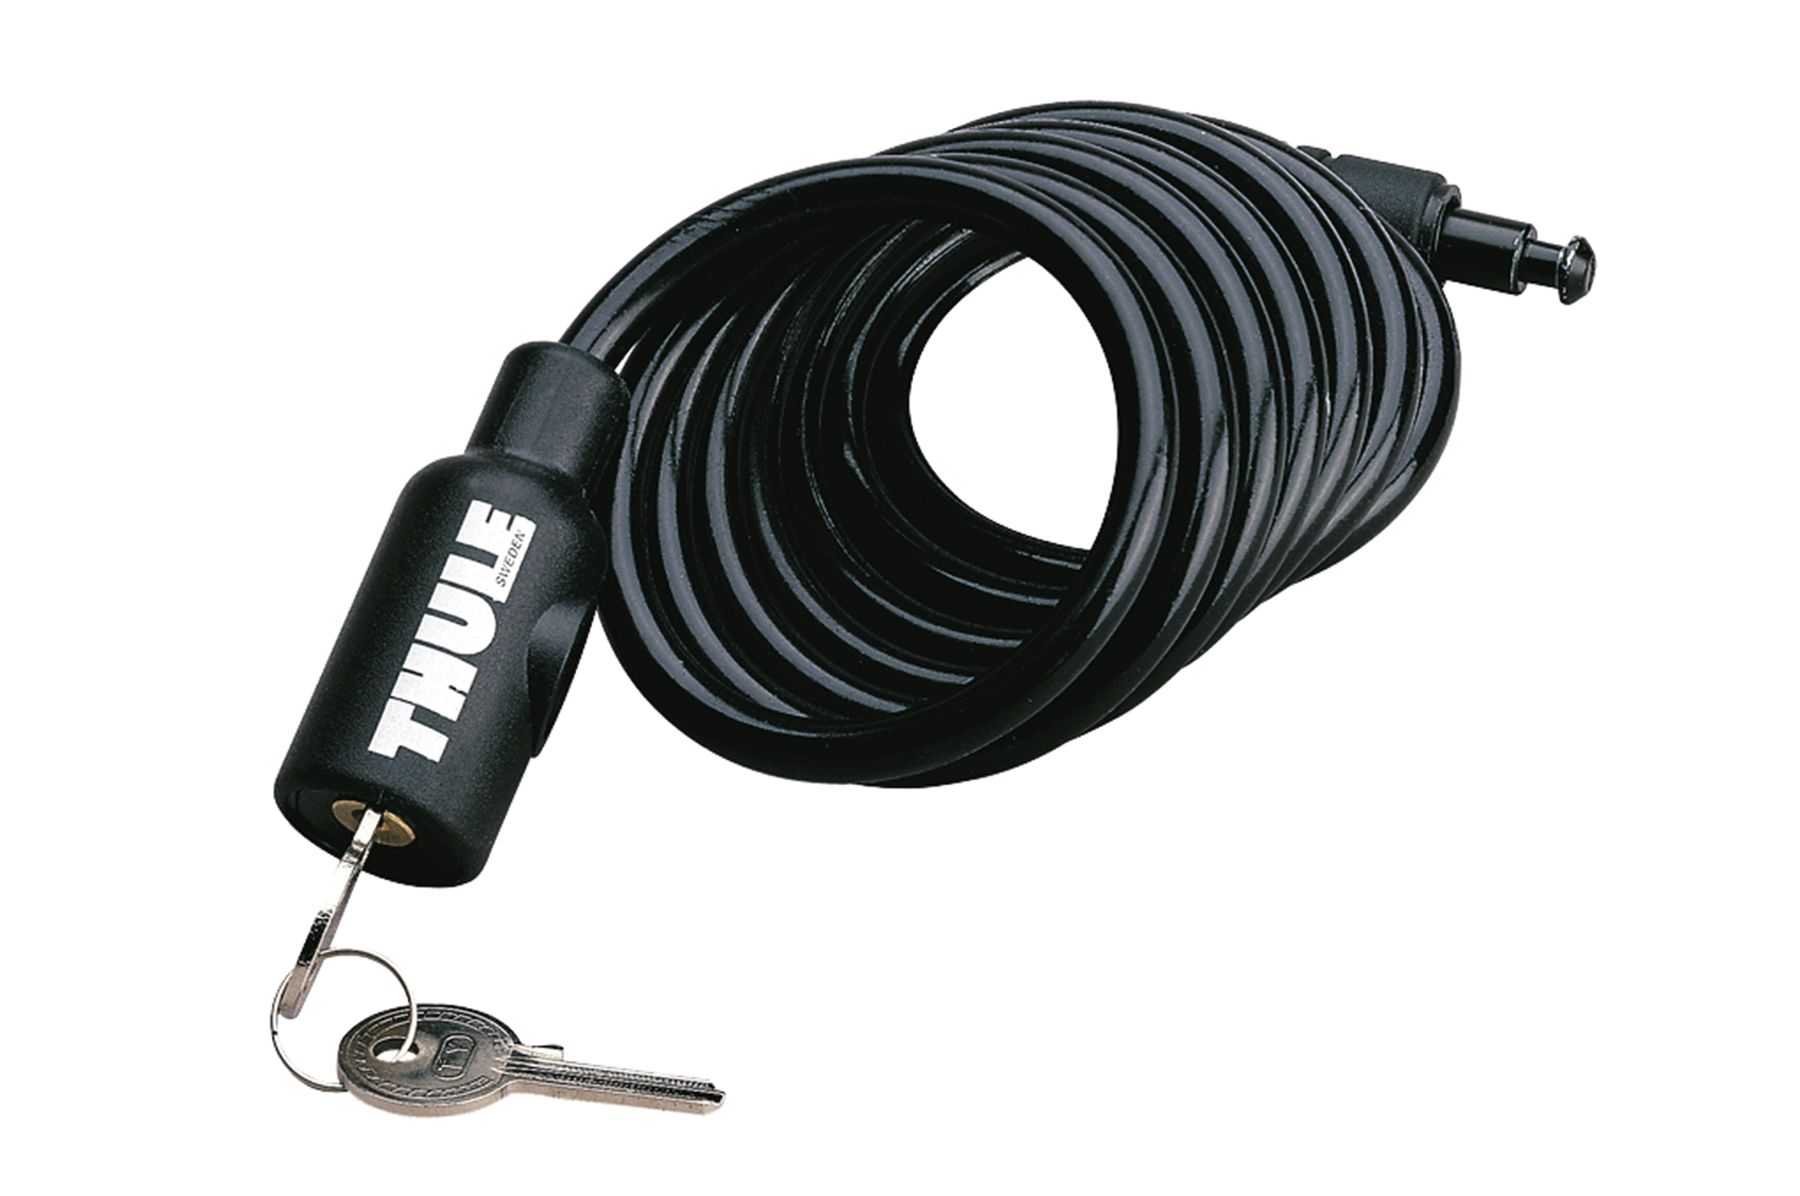 Thule Cable Lock